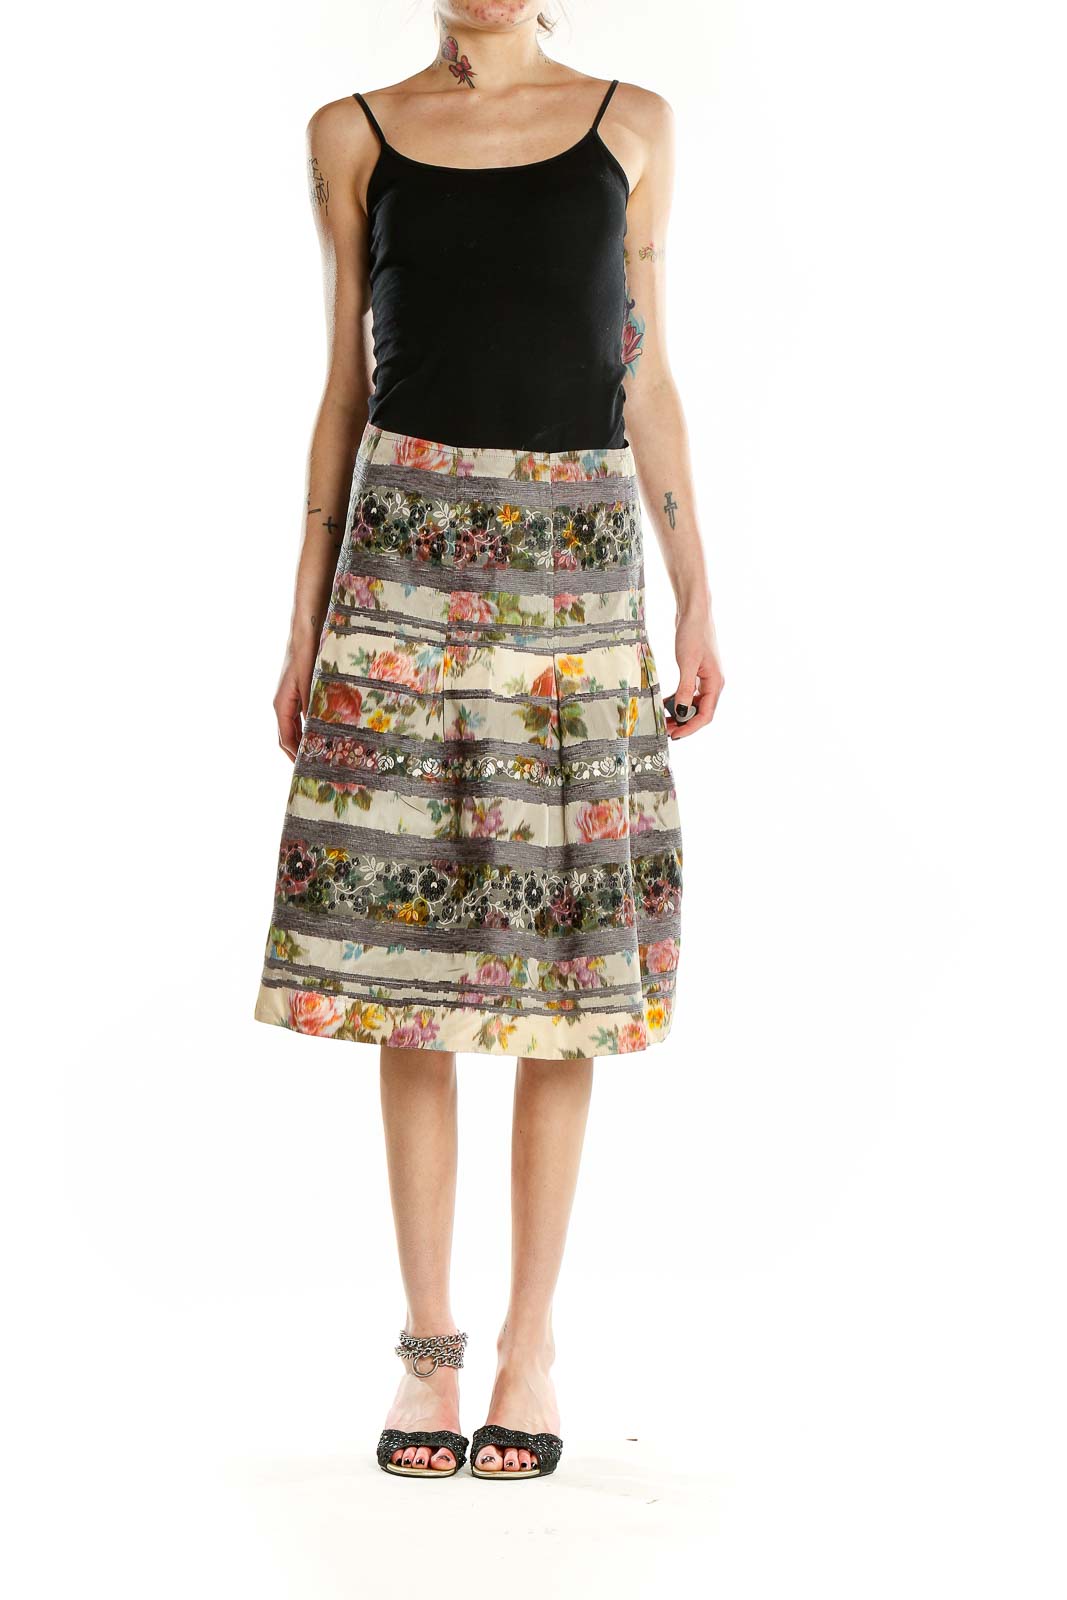 Shop Skirts With Points or SilkRoll Cash 